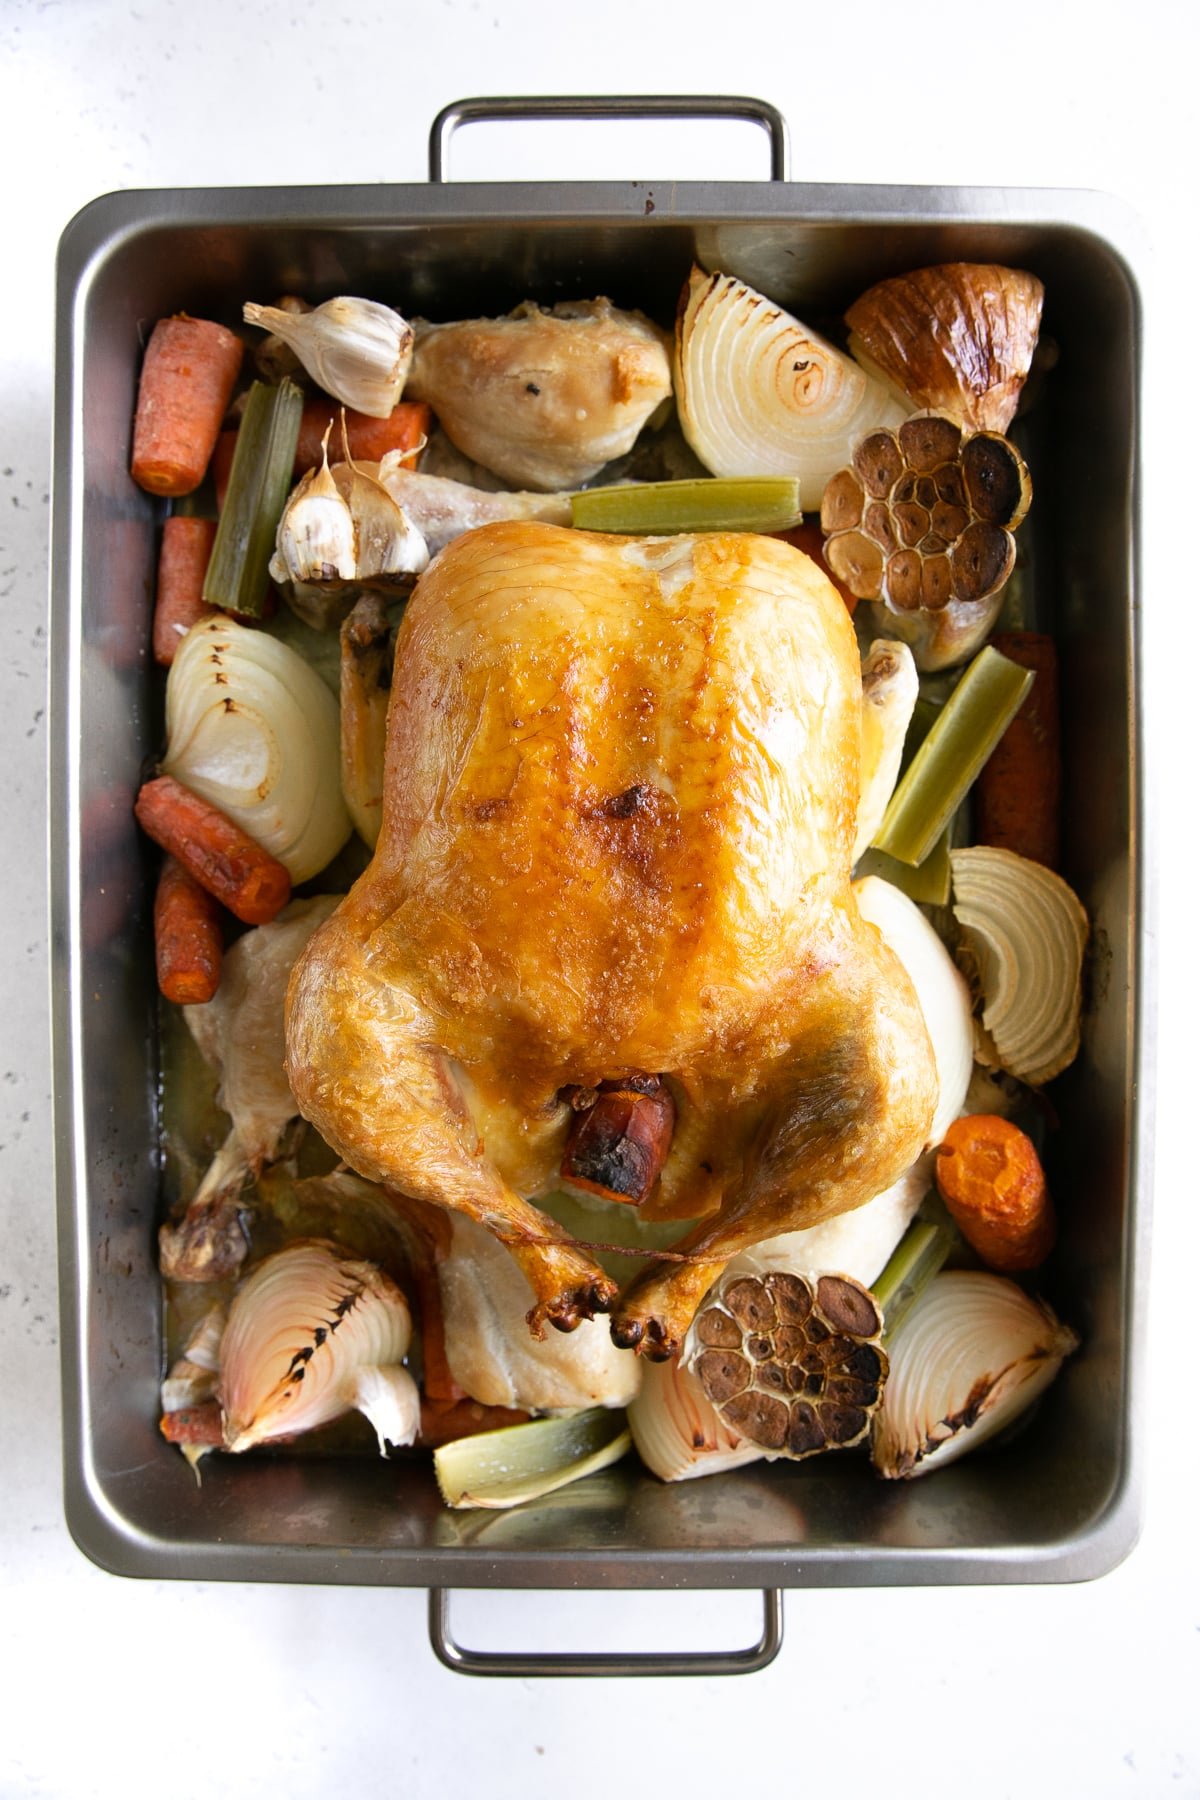 Whole browned chicken and vegetables in a large roasting pan.